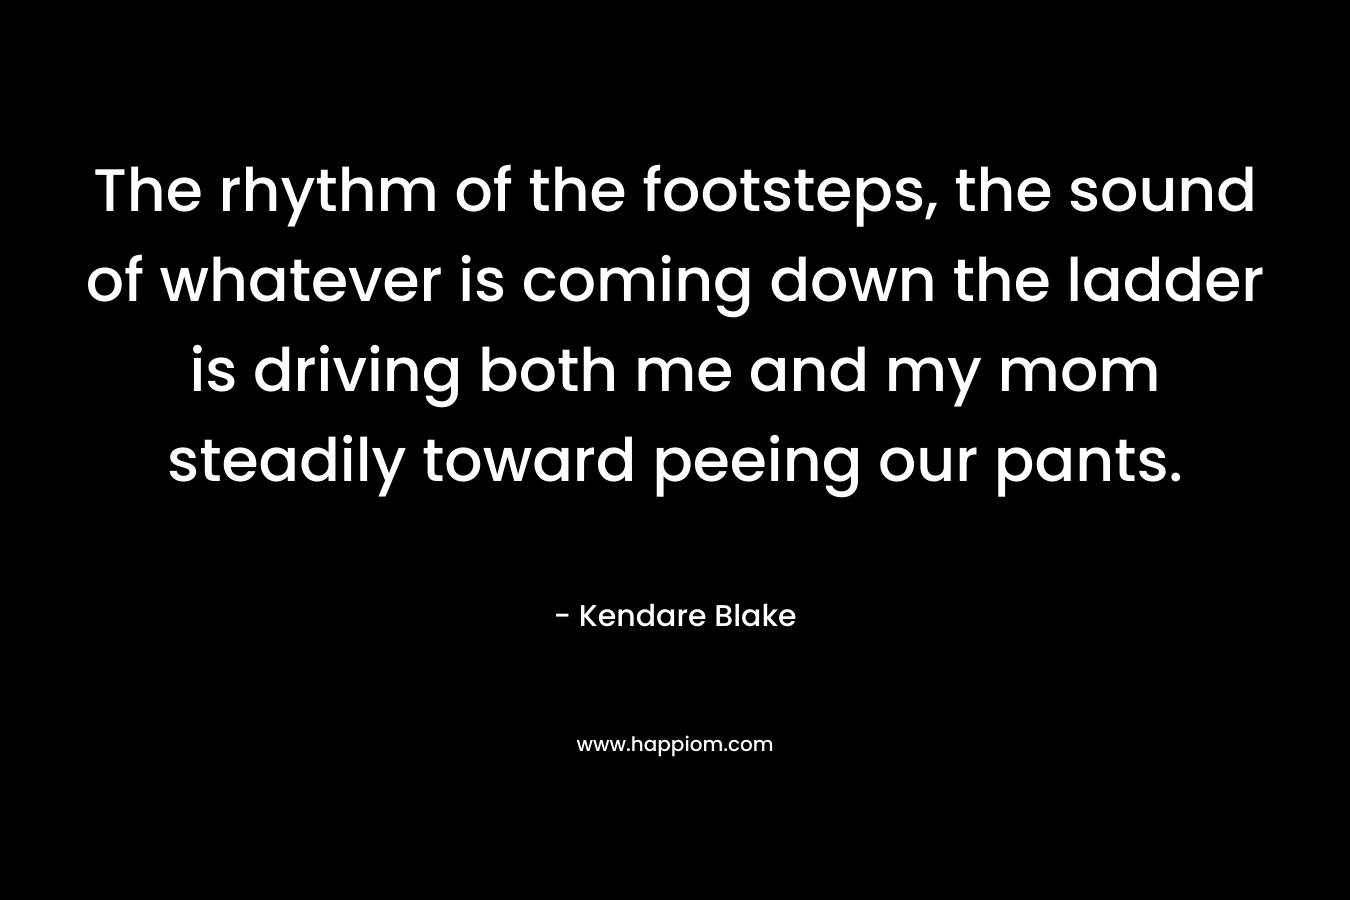 The rhythm of the footsteps, the sound of whatever is coming down the ladder is driving both me and my mom steadily toward peeing our pants. – Kendare Blake